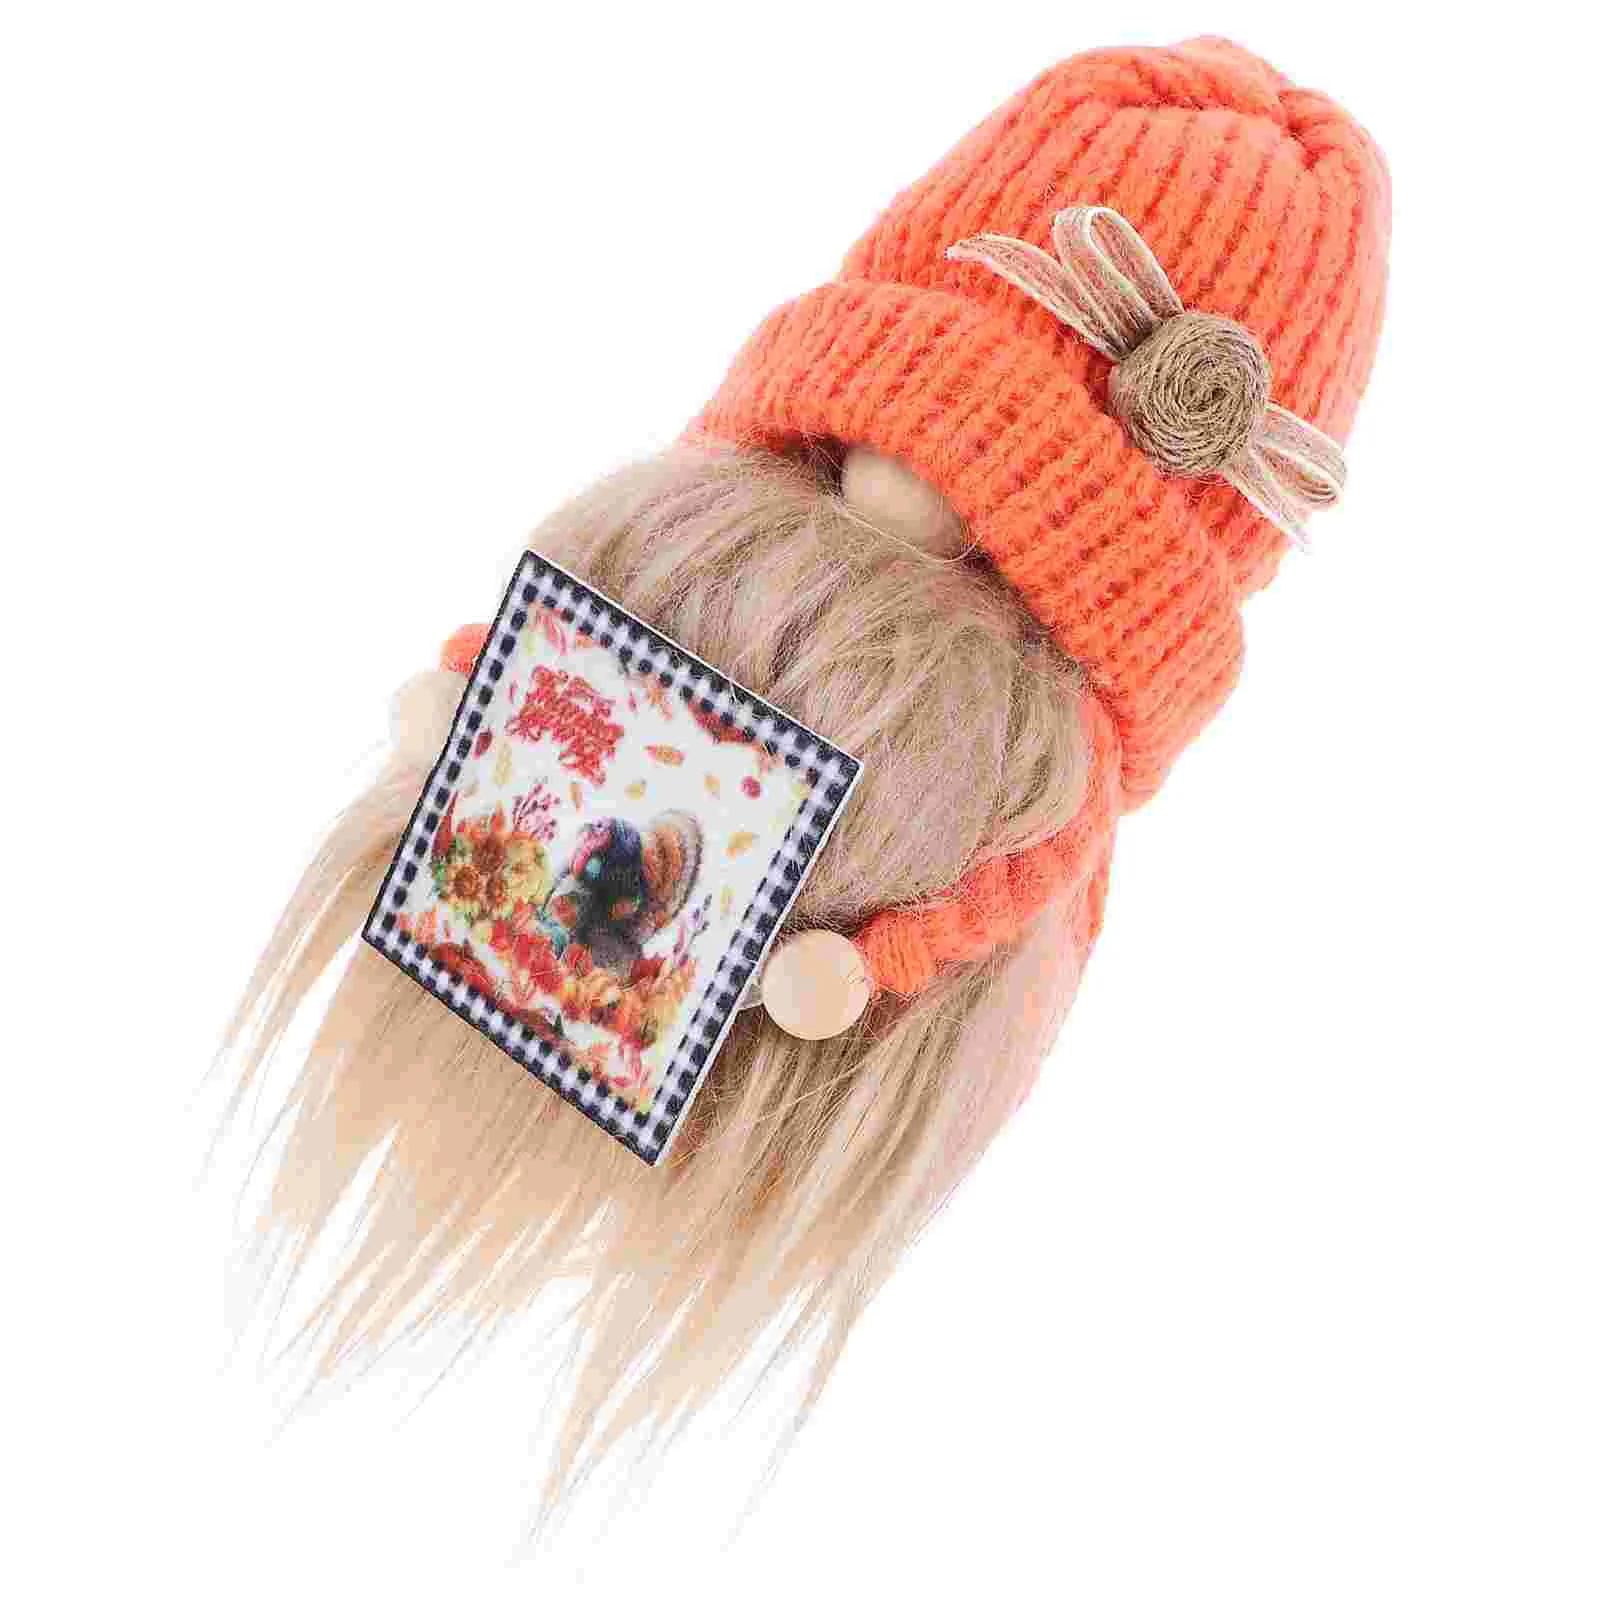 

Festival Layout Prop Harvest Gnome Ornament Fall Decor Desktop Adornment Thanksgiving Table Centerpiece Gnomes Knitted Hat